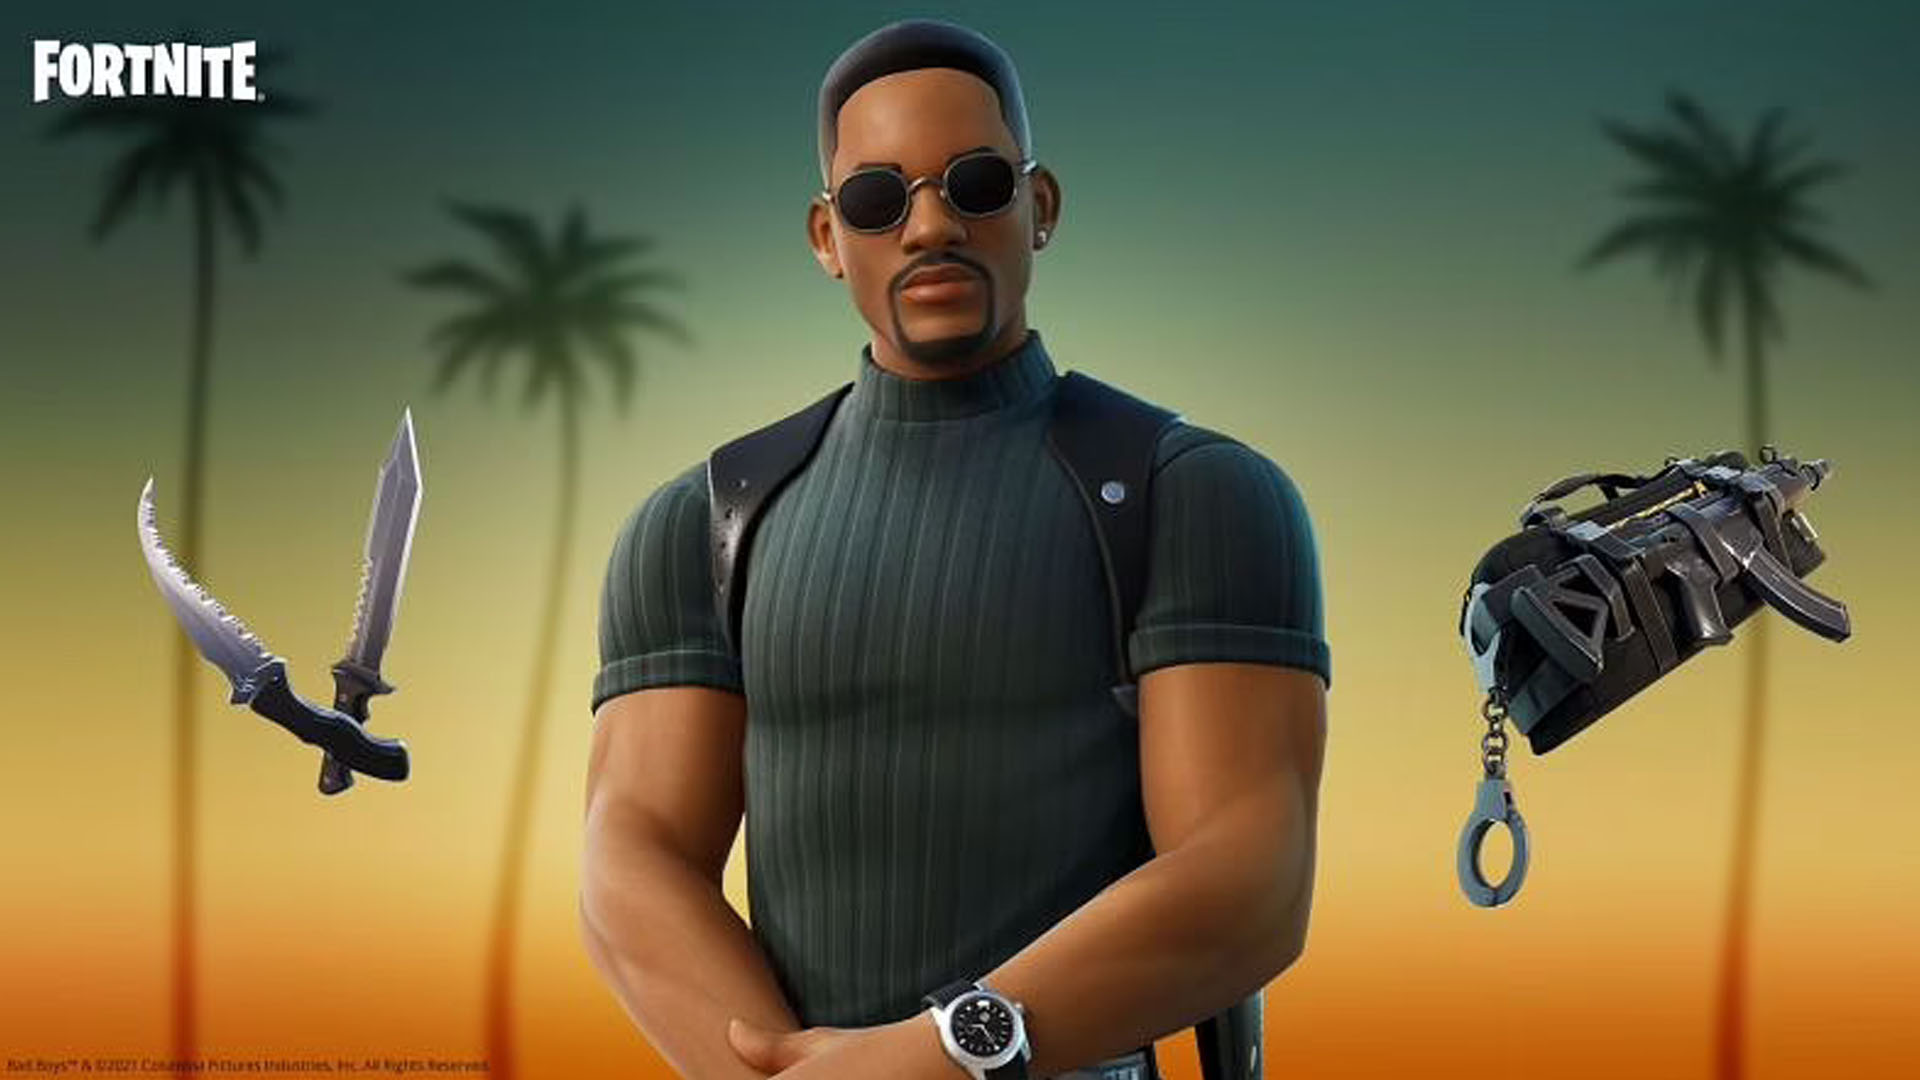 How to get the Mike Lowrey Fortnite skin in Season 7